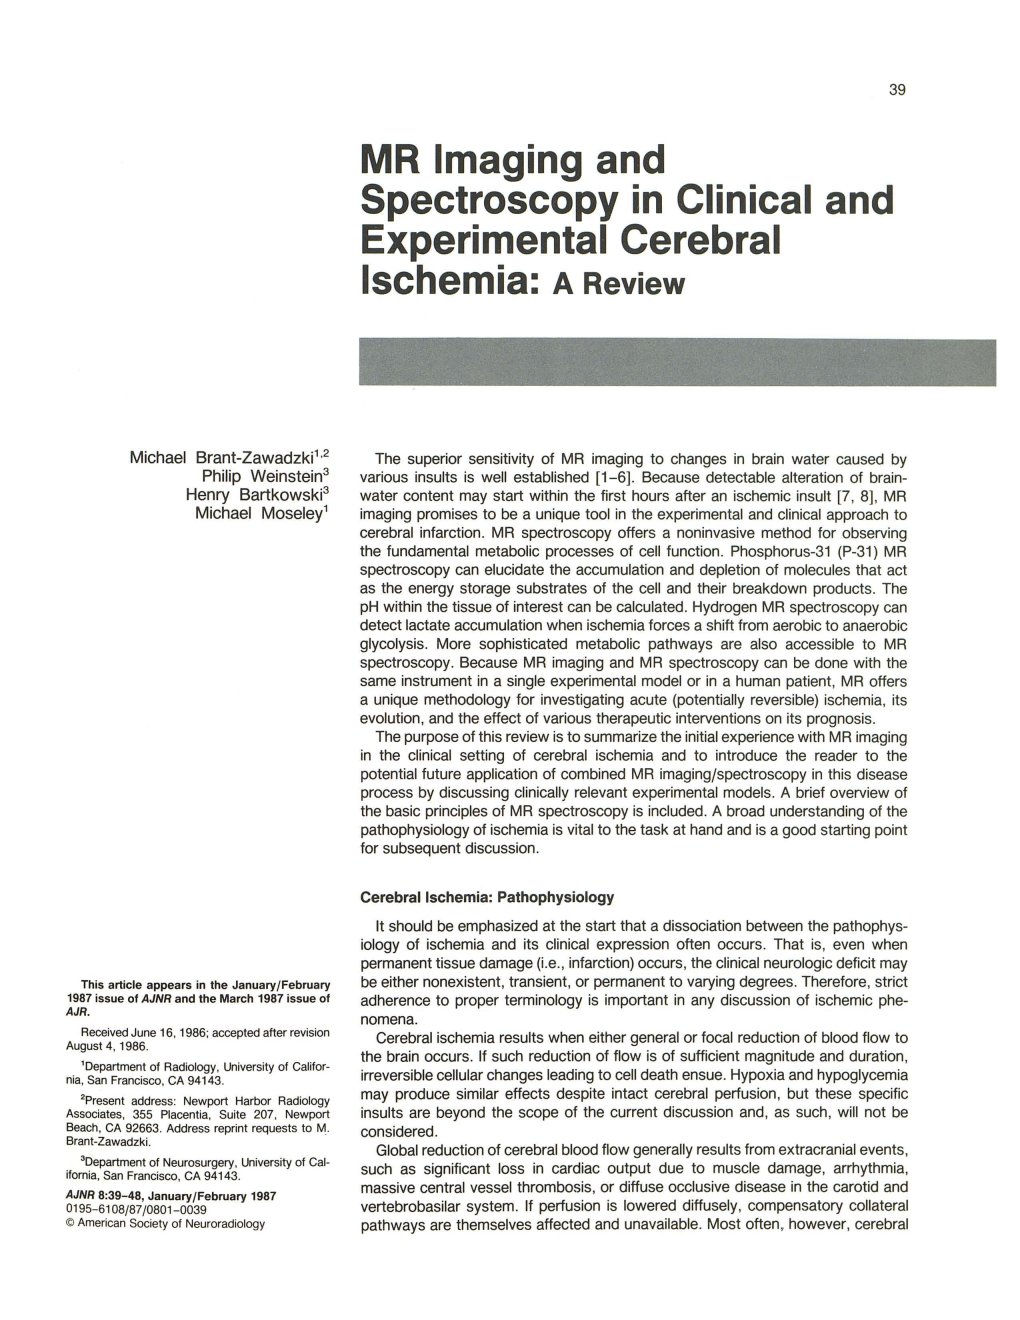 MR Imaging and Spectroscopy in Clinical and Experimental Cerebral Ischemia: a Review